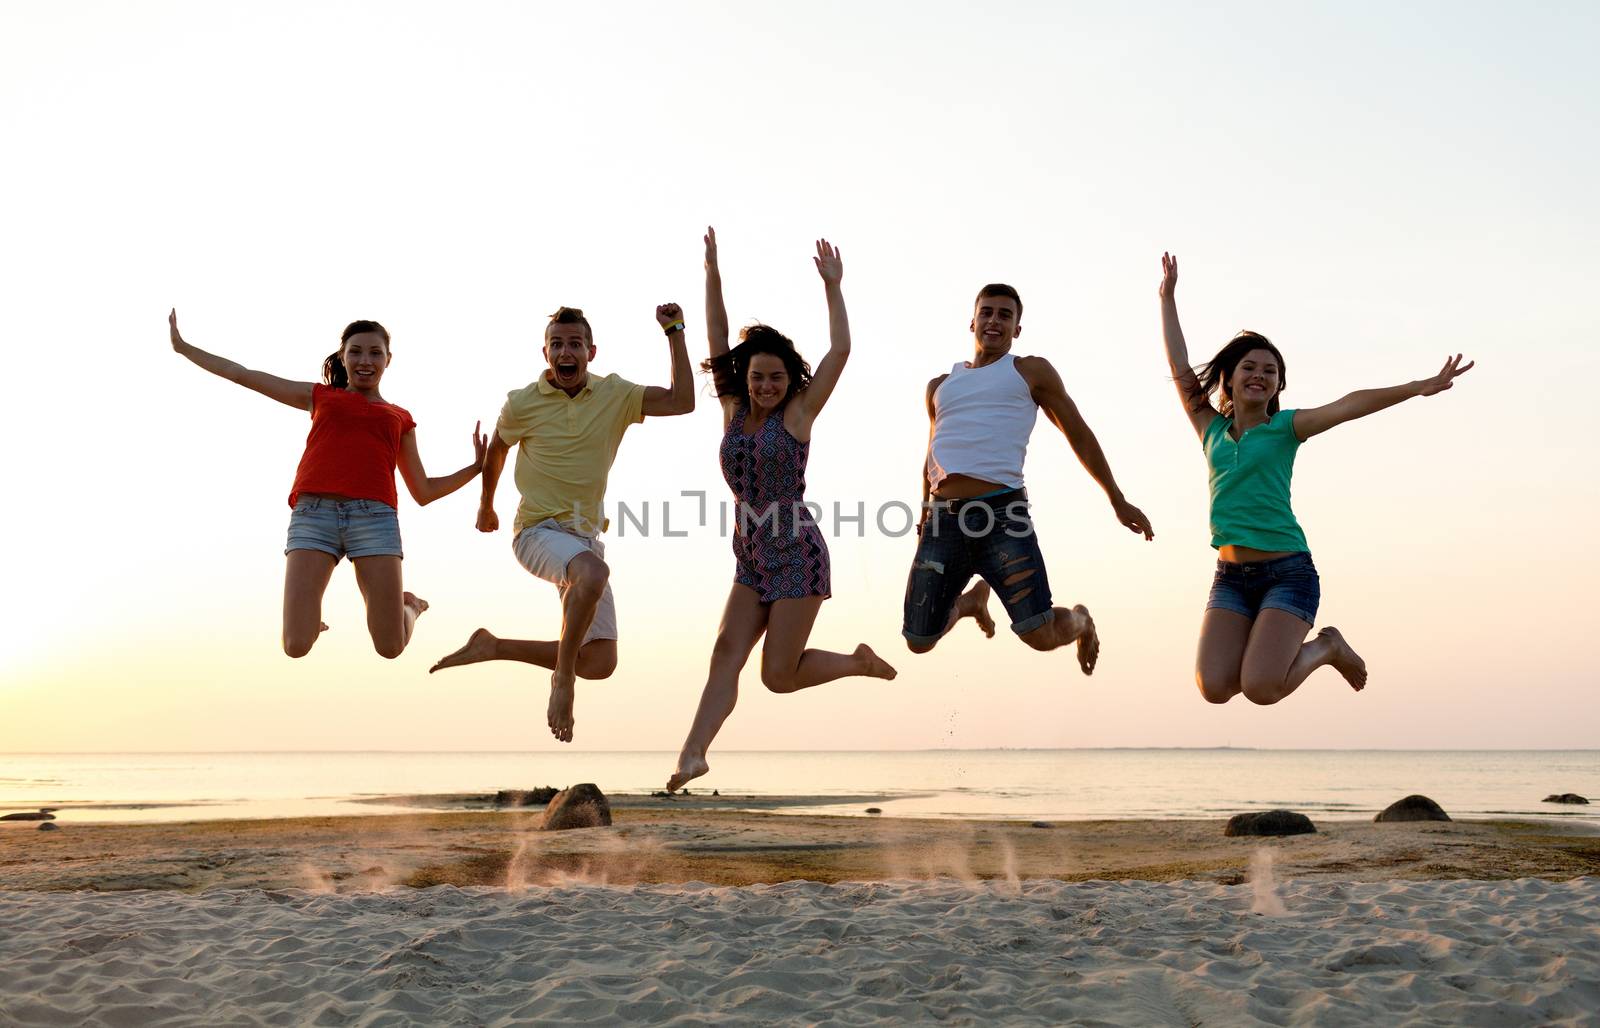 smiling friends dancing and jumping on beach by dolgachov